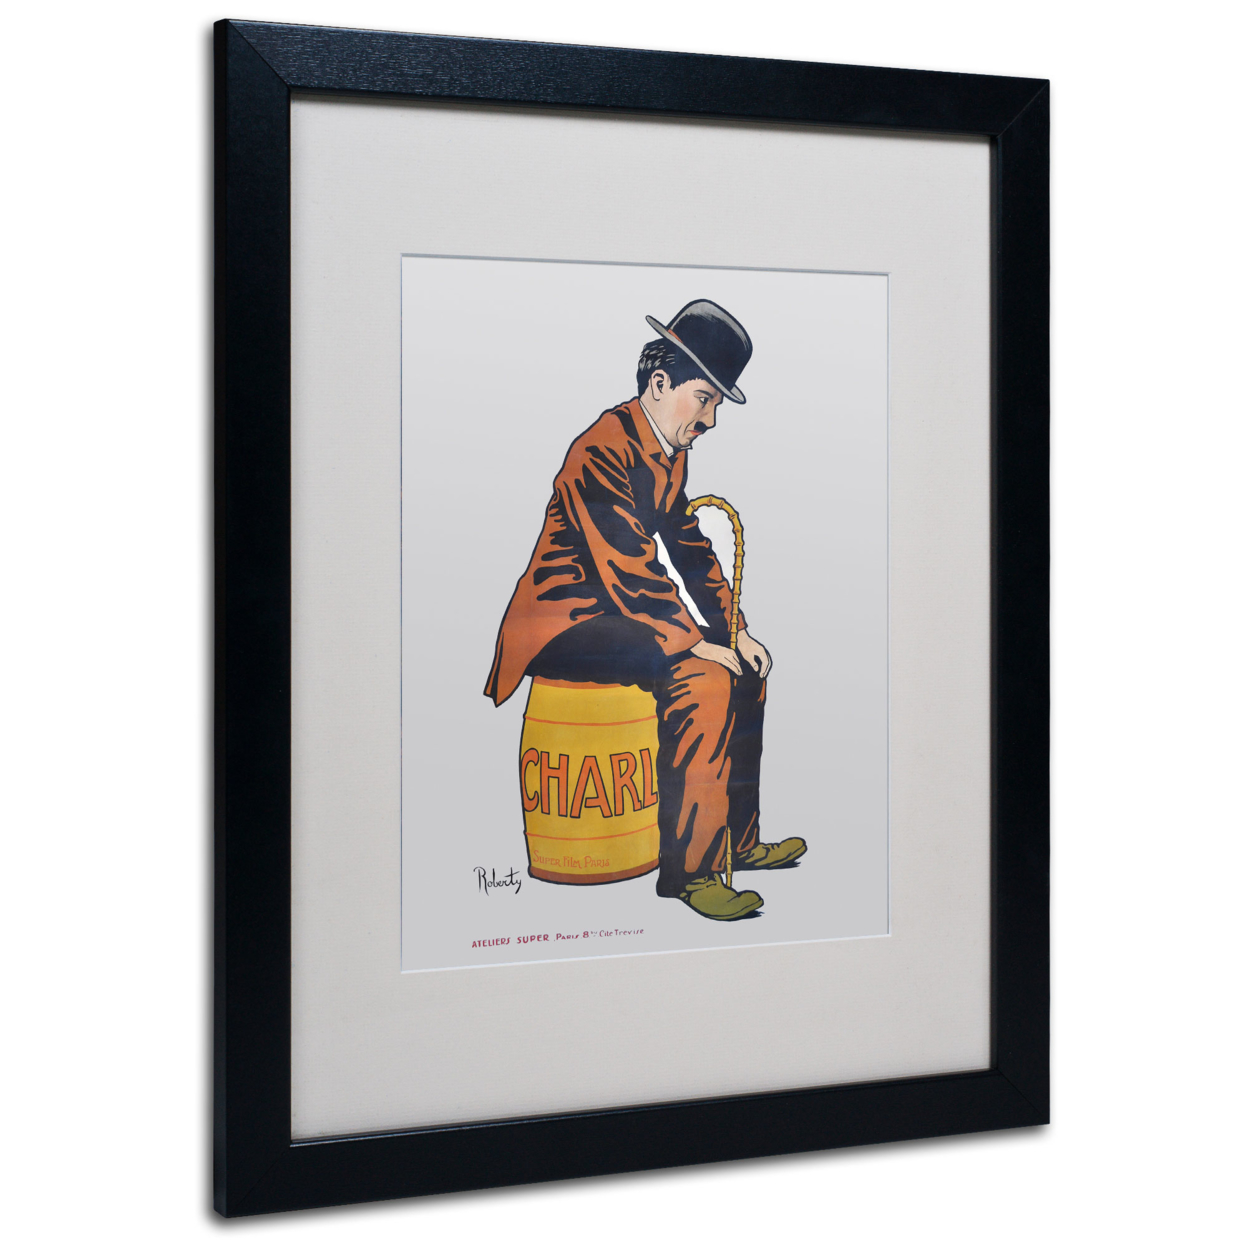 Vintage Apple Collection 'Chaplin' Black Wooden Framed Art 18 X 22 Inches